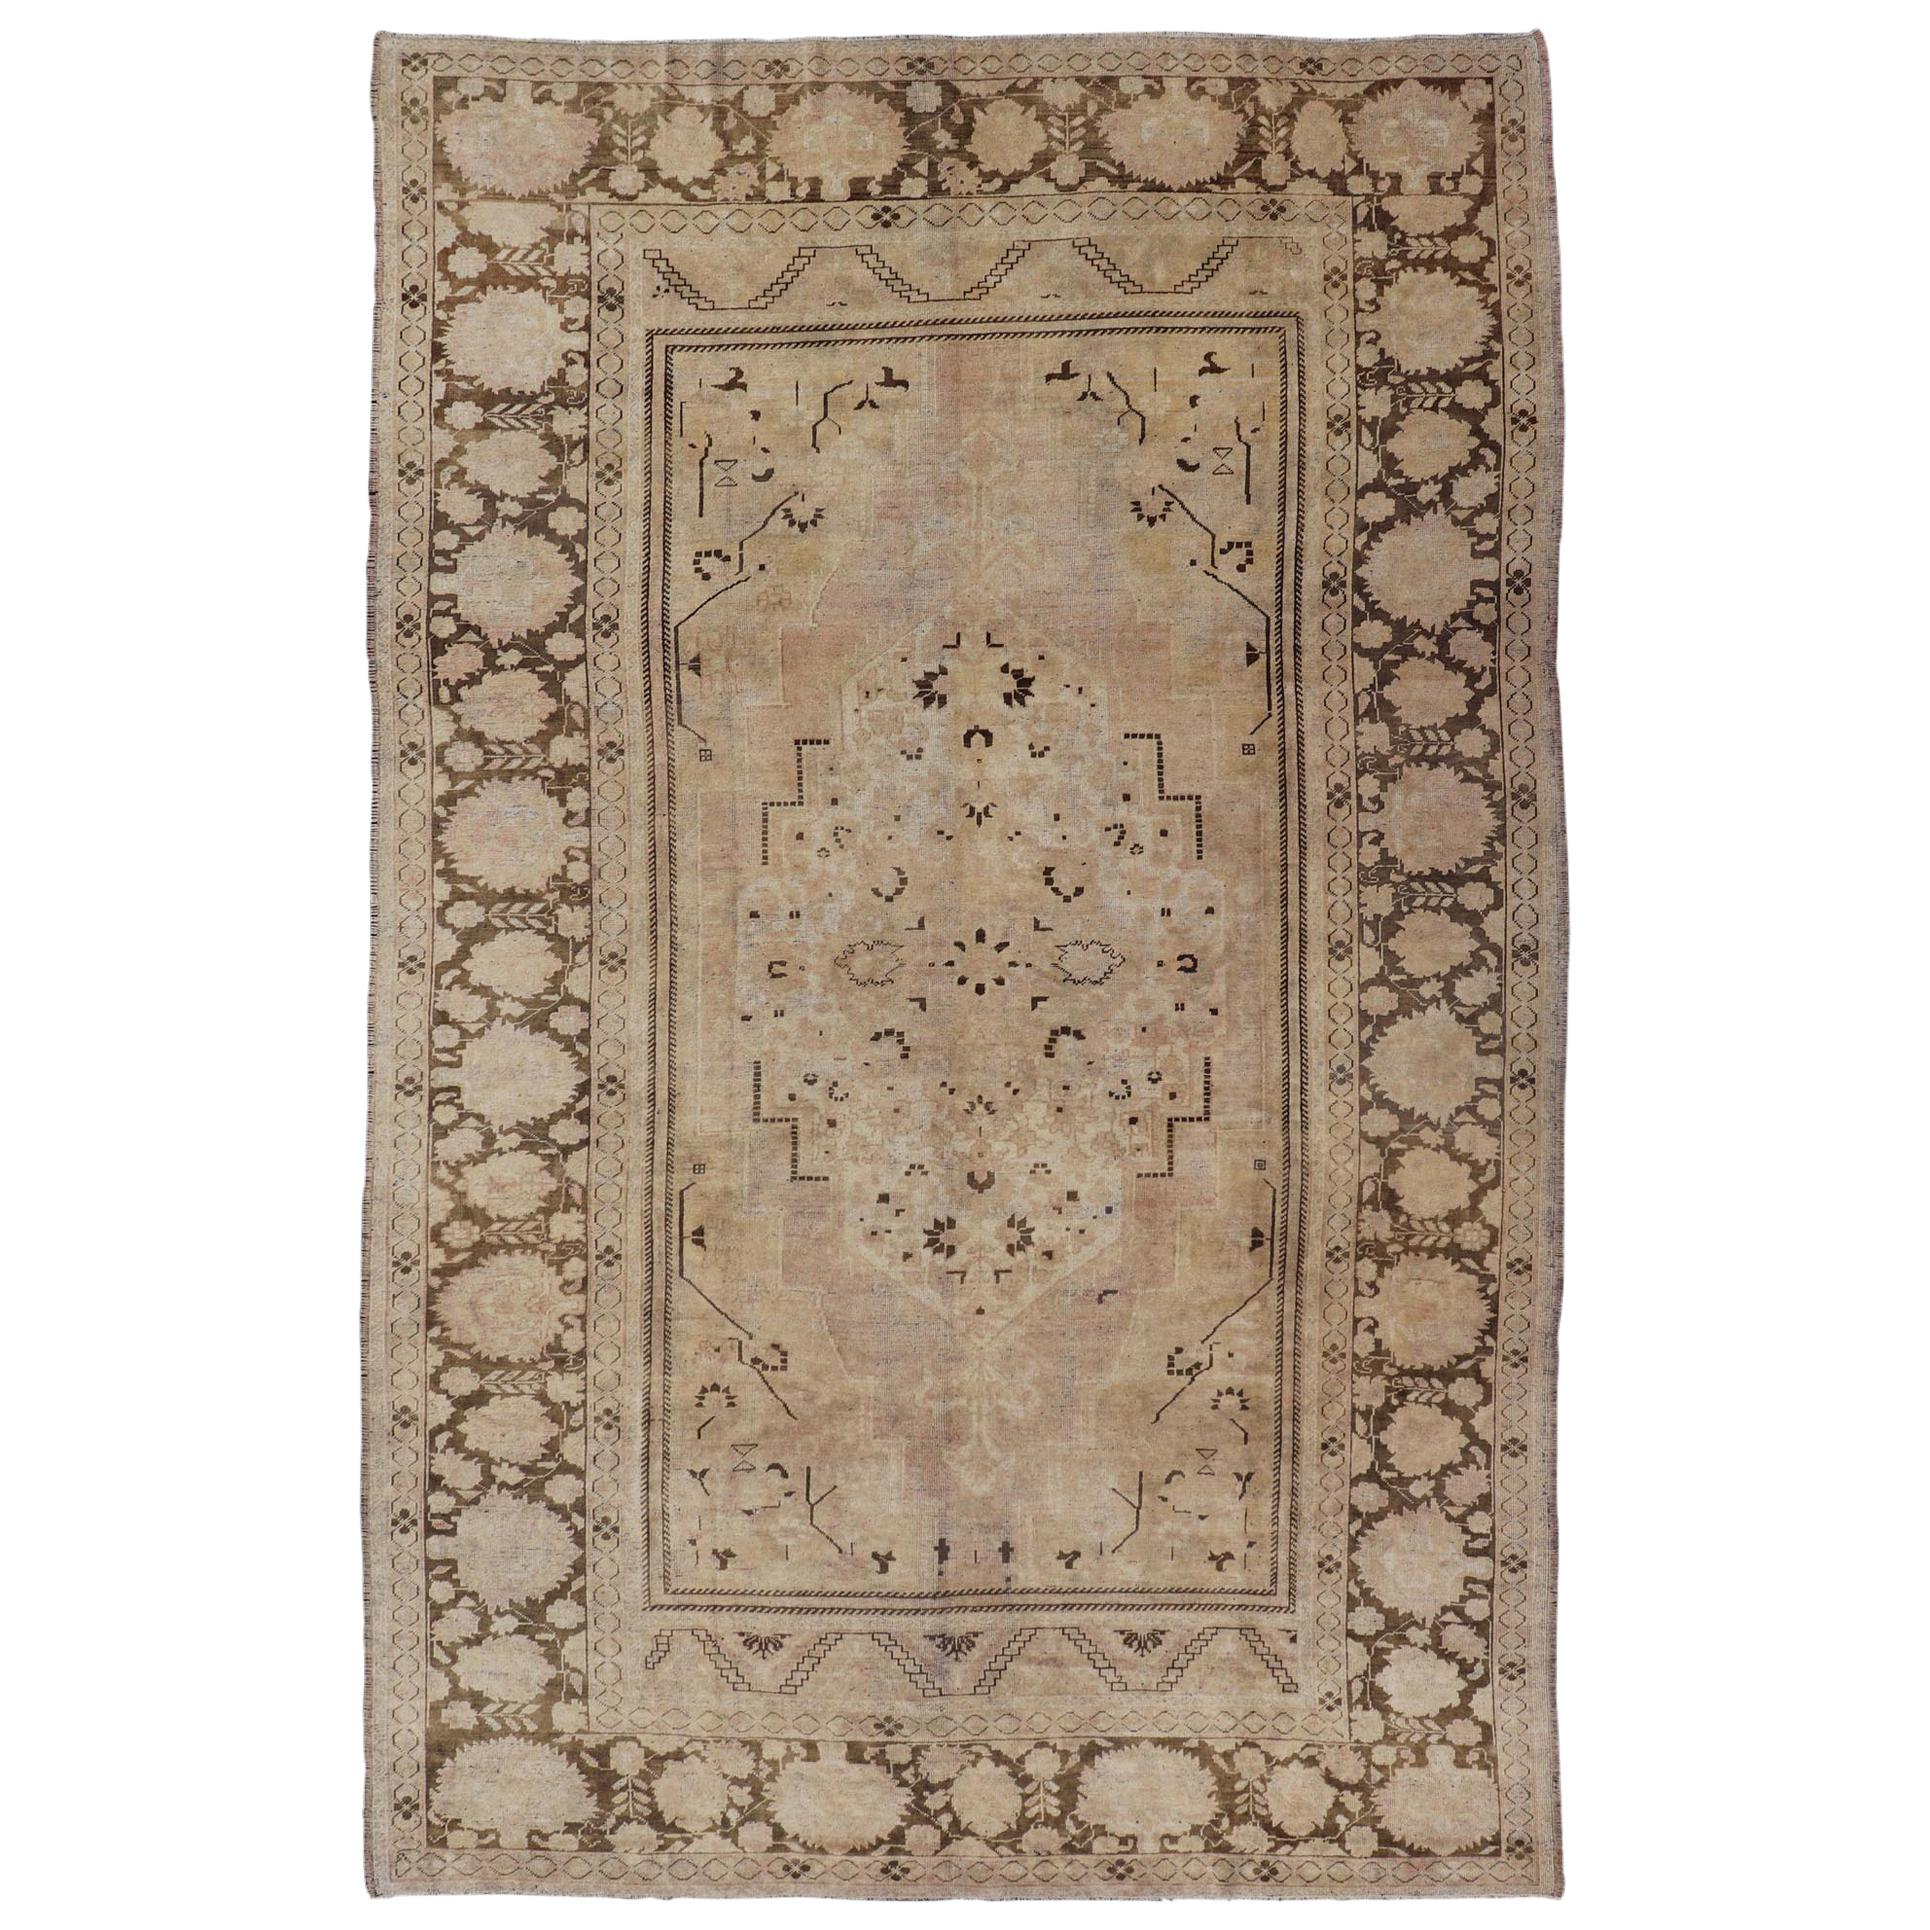 Vintage Oushak Rug with Muted Neutral Colors in Tan, Beige, Taupe, Gray & Brown For Sale